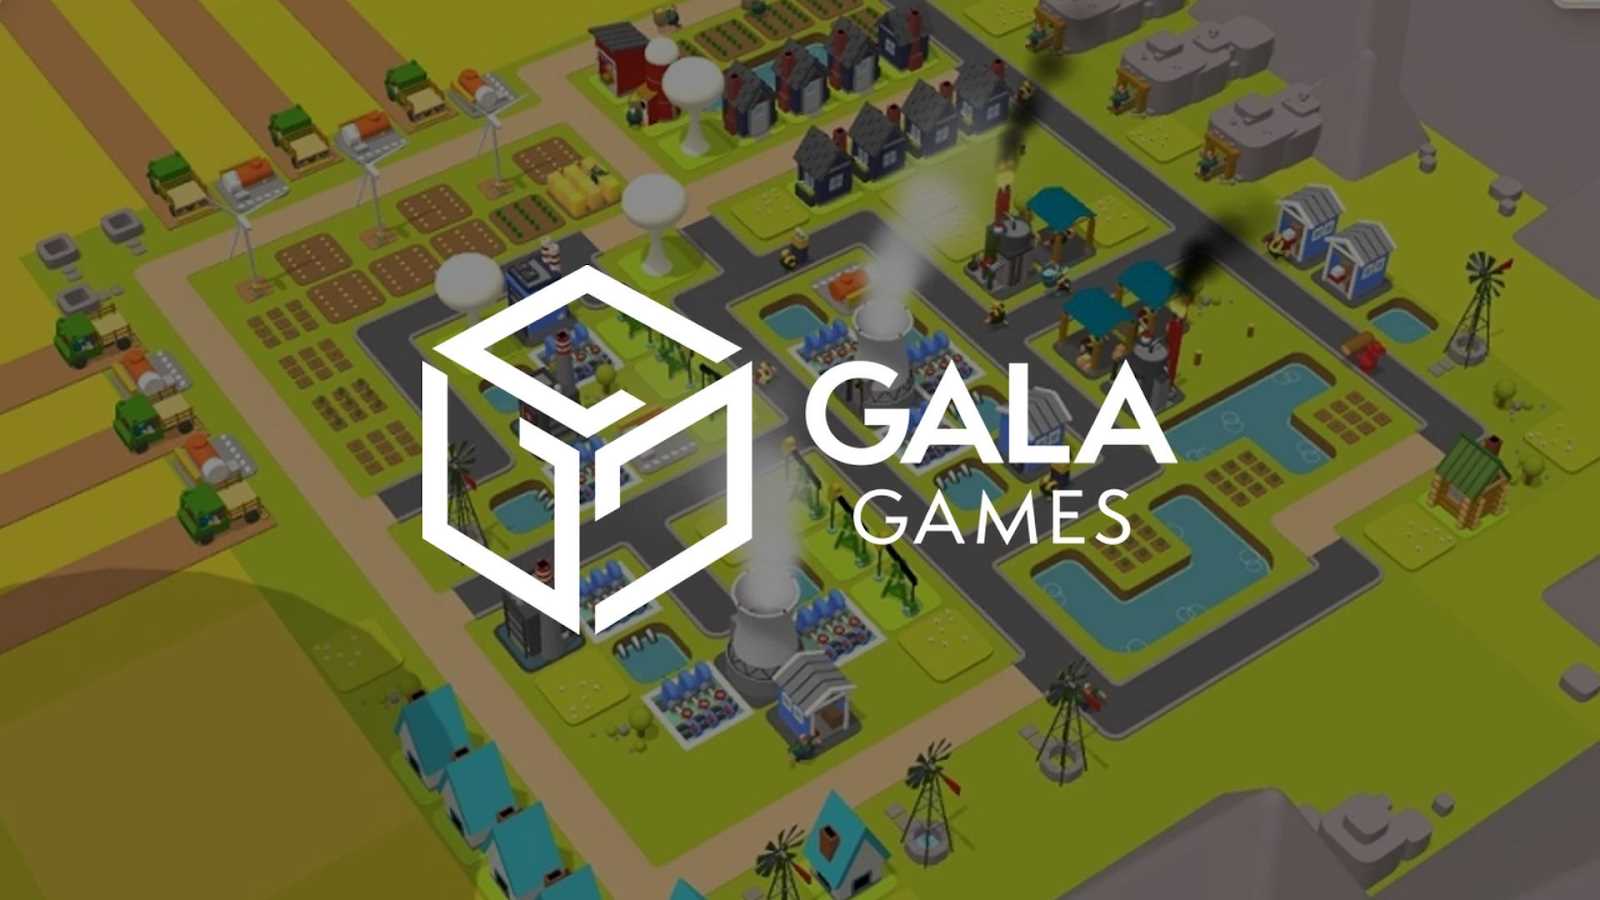 The future of in-game economies with Galxe (GAL) tokens